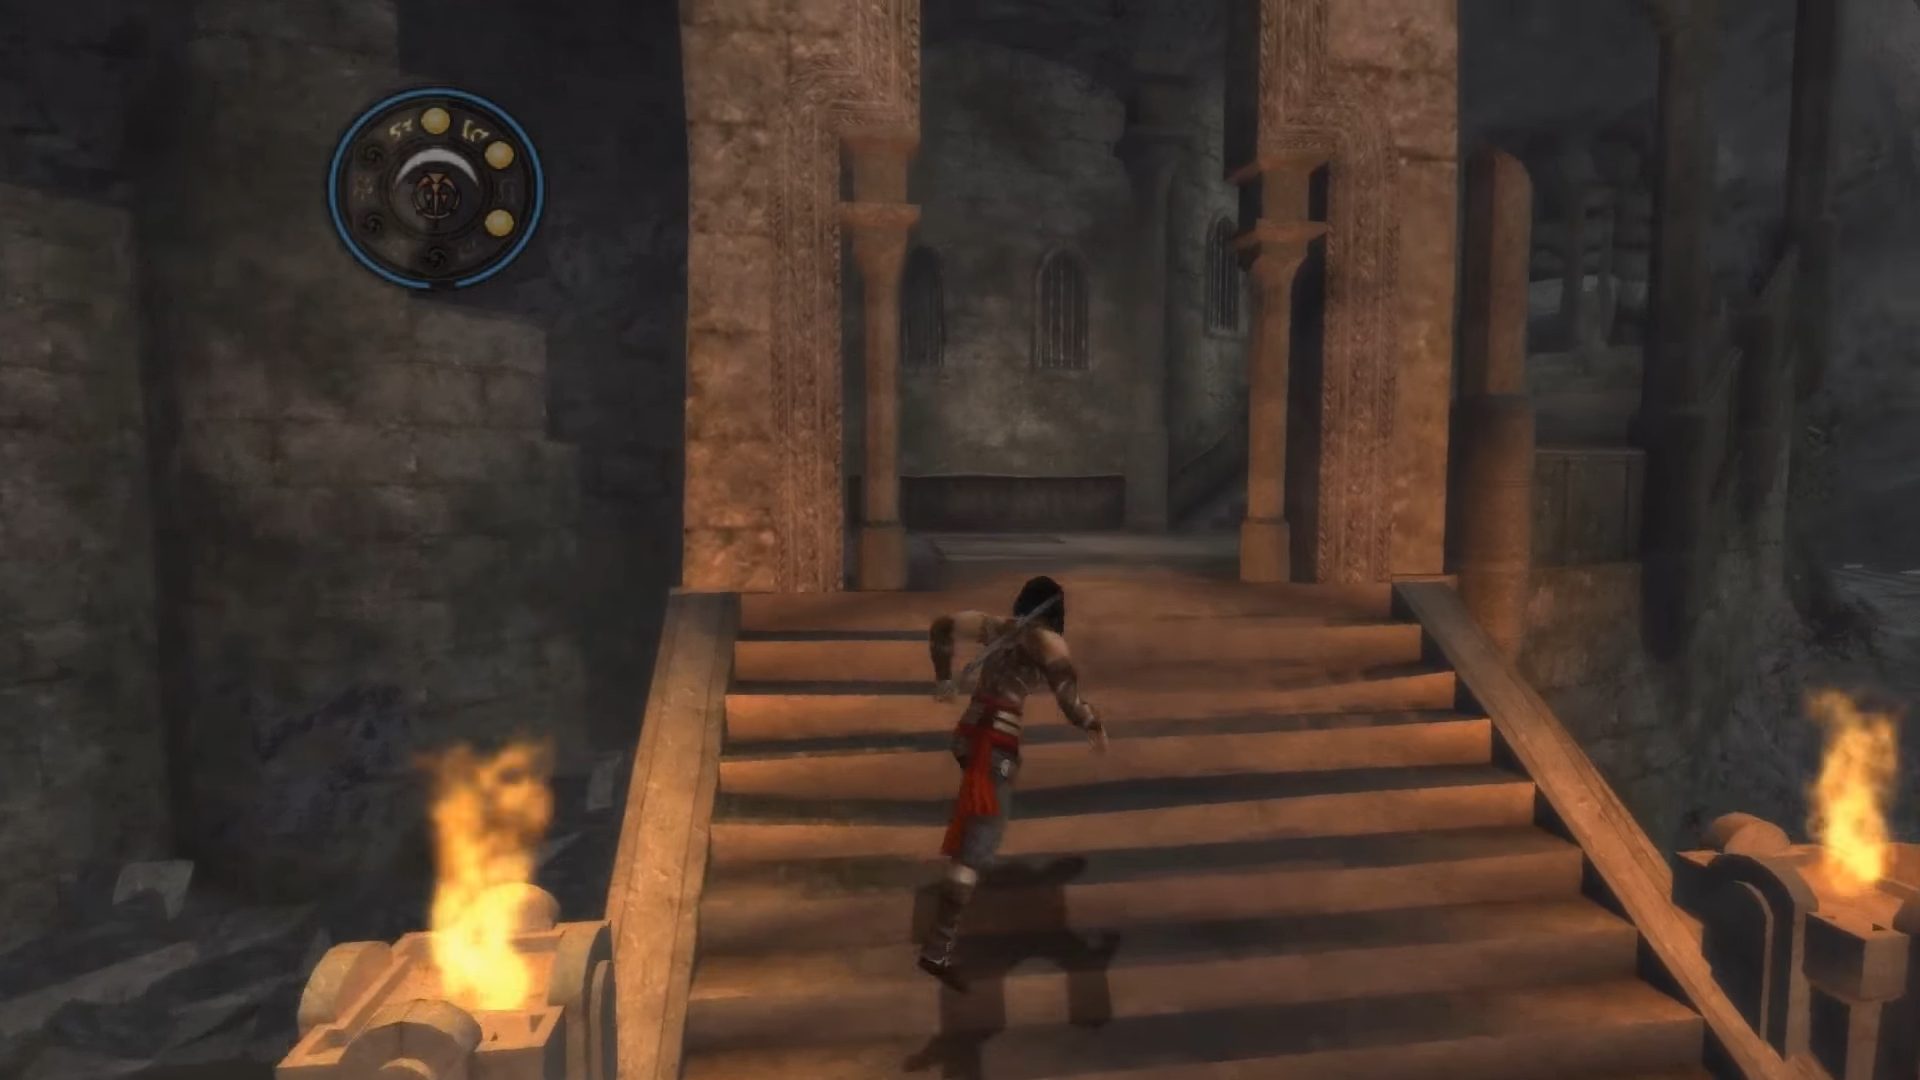 Prince of persia lost crown switch nintendo